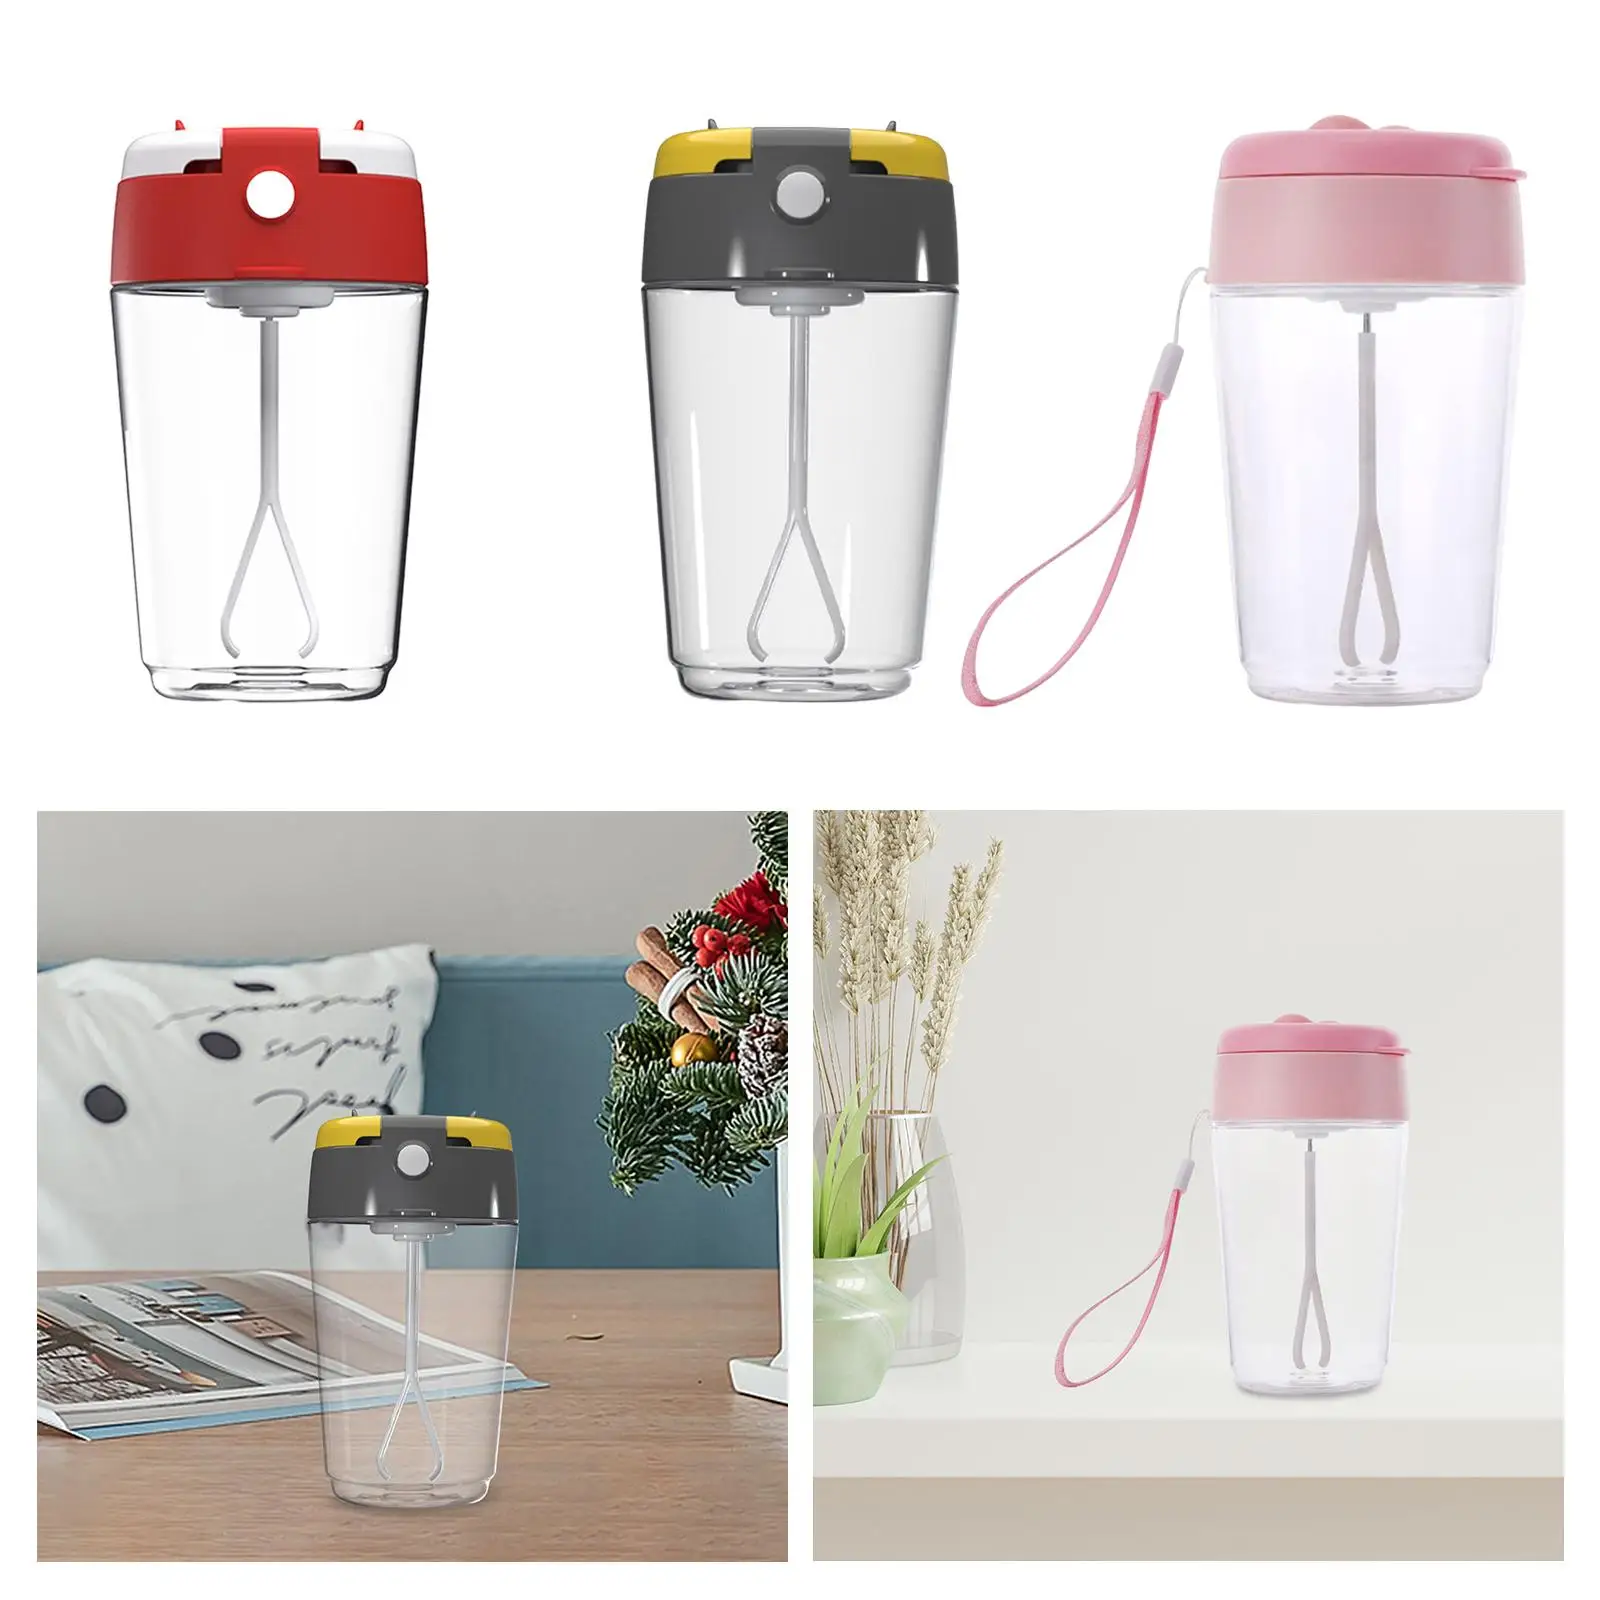 Electric Protein Shaker Bottle Leakproof Powerful Mixer Cup for Coffee Milkshakes SHAKE Mixer Protein Powder Gym Accessories